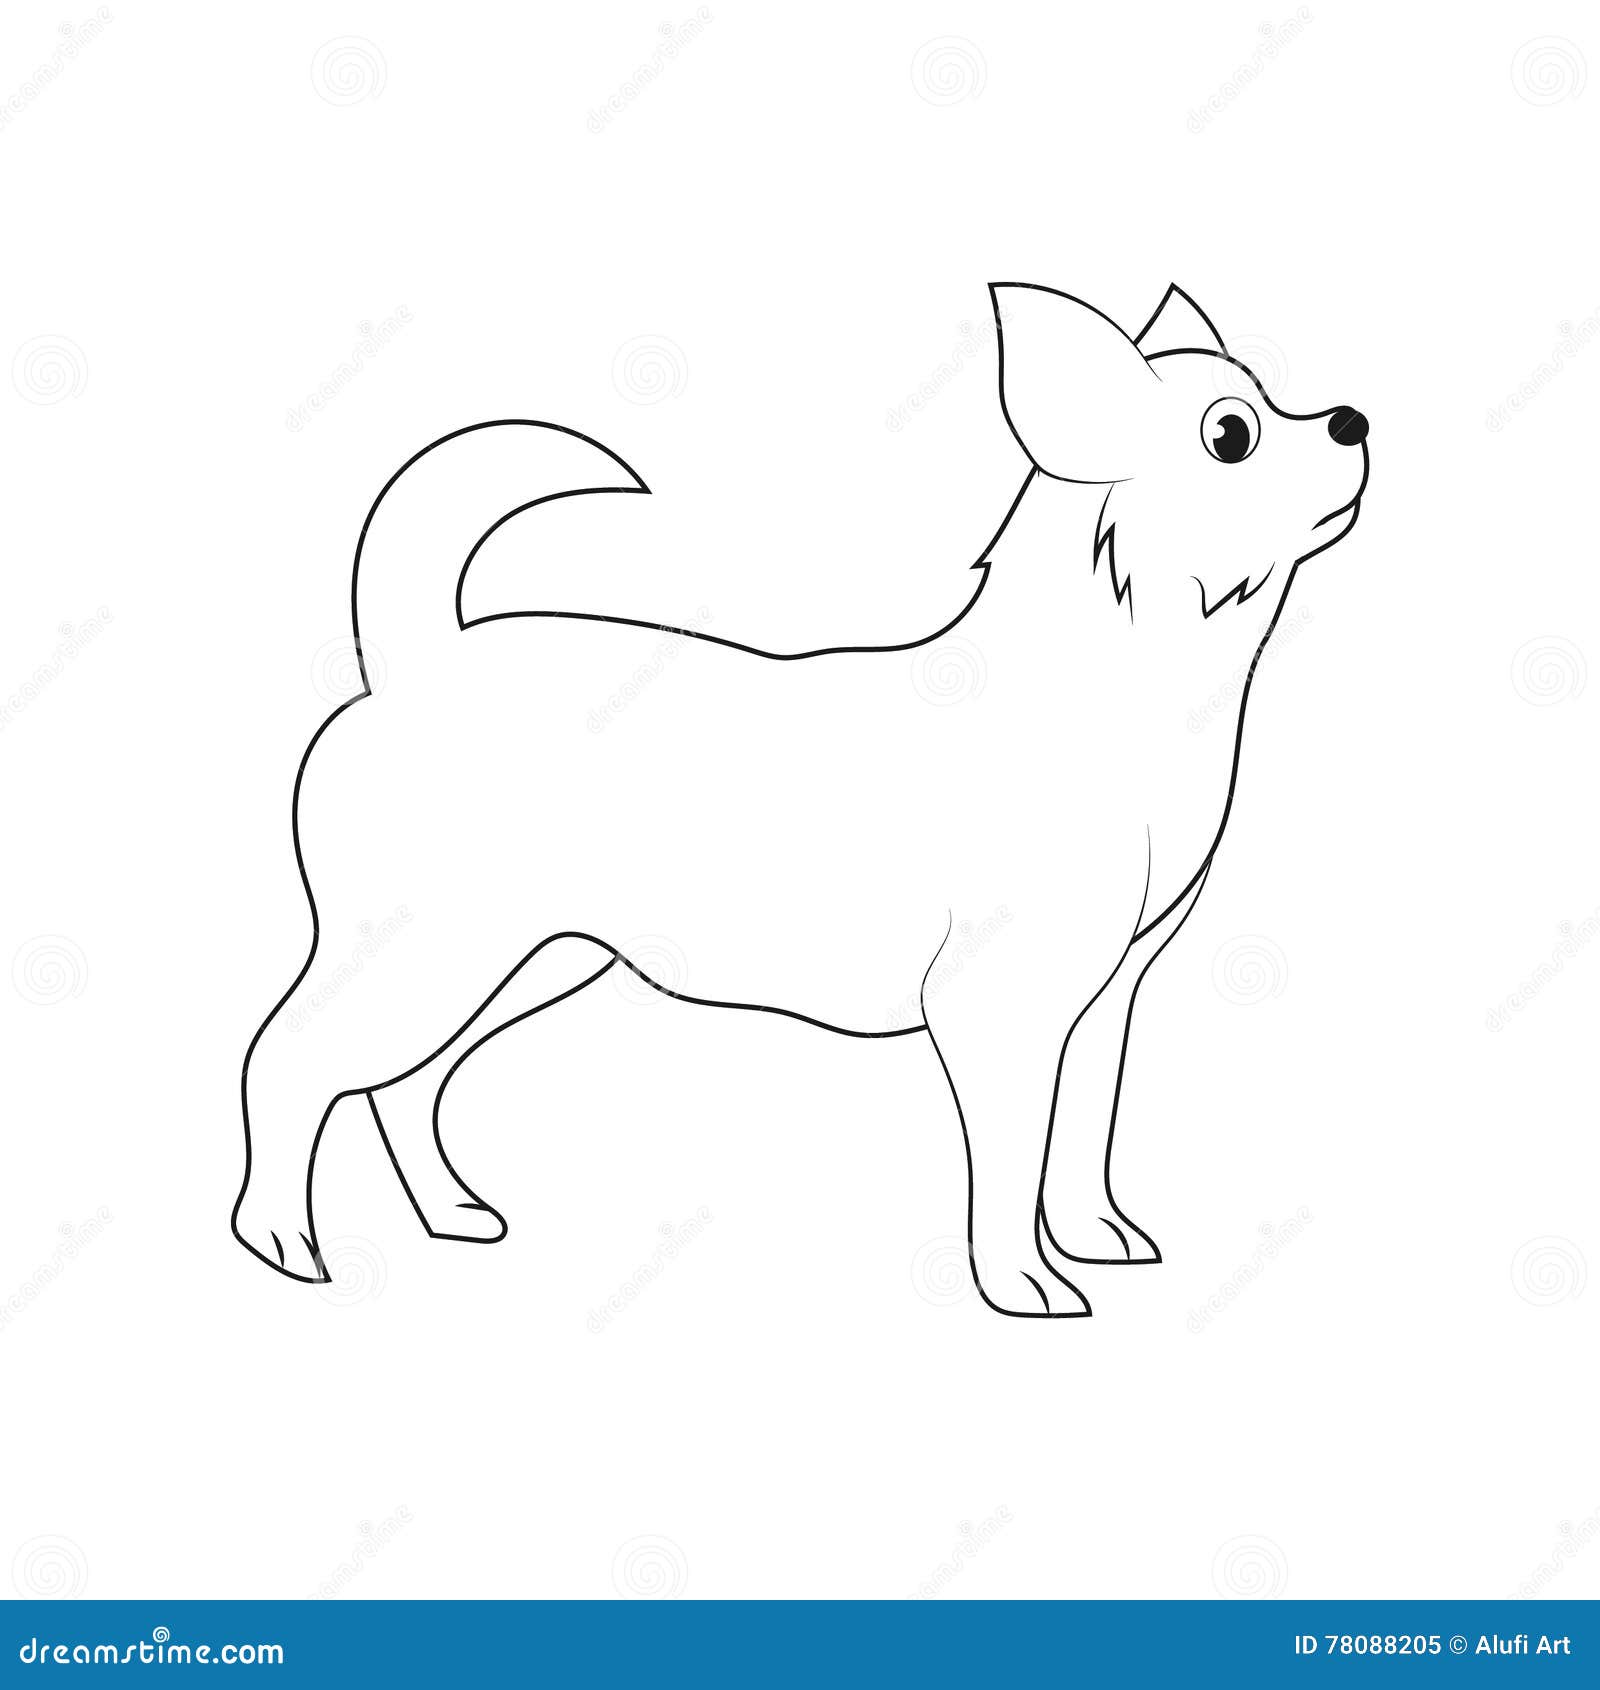 Standing Dog From Side View Outline Stock Illustration